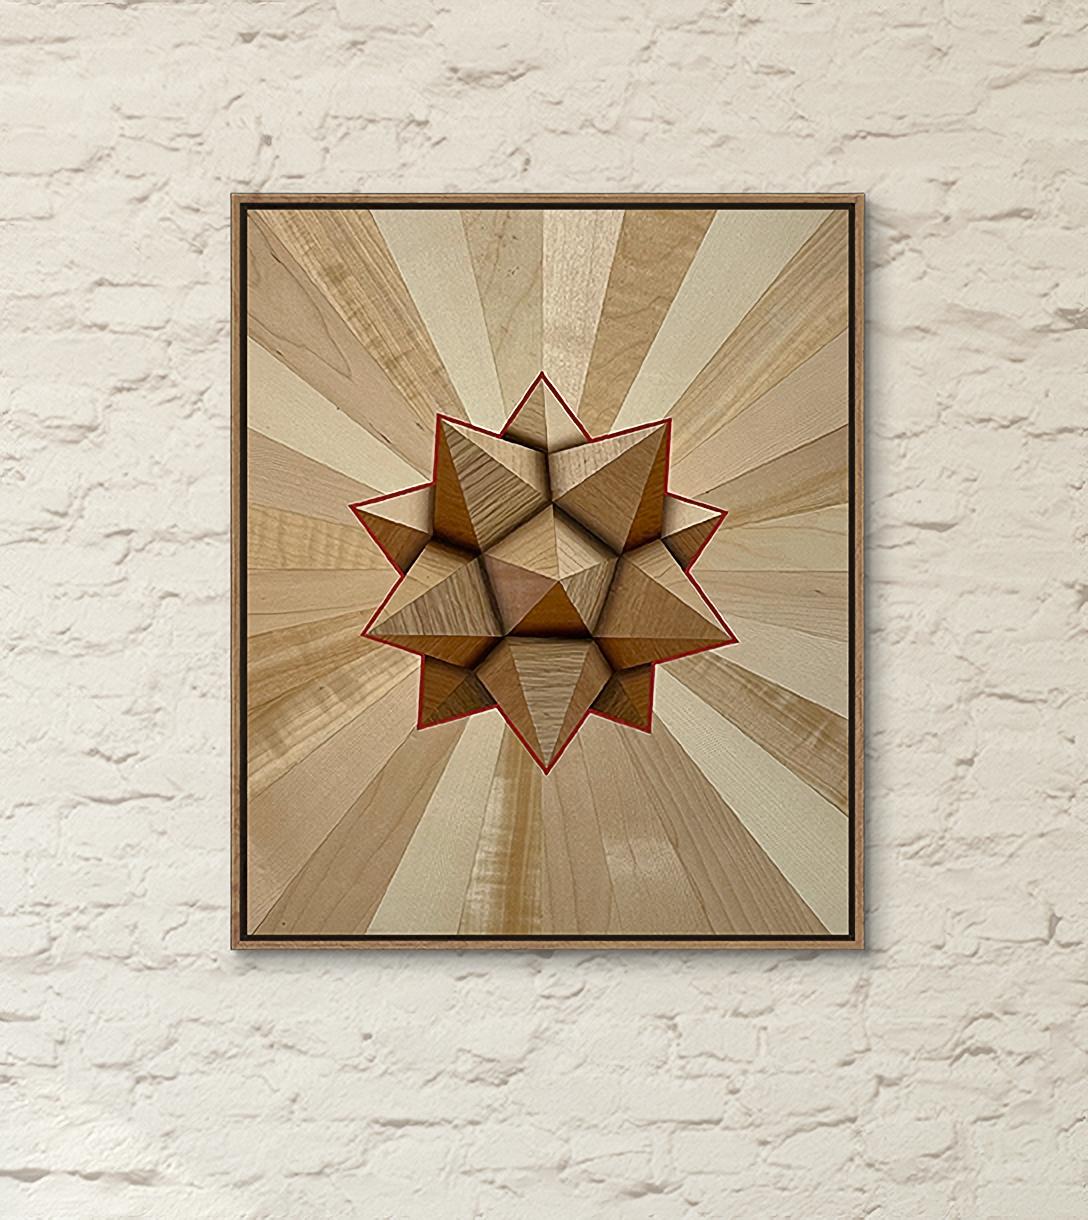 marquetry designs